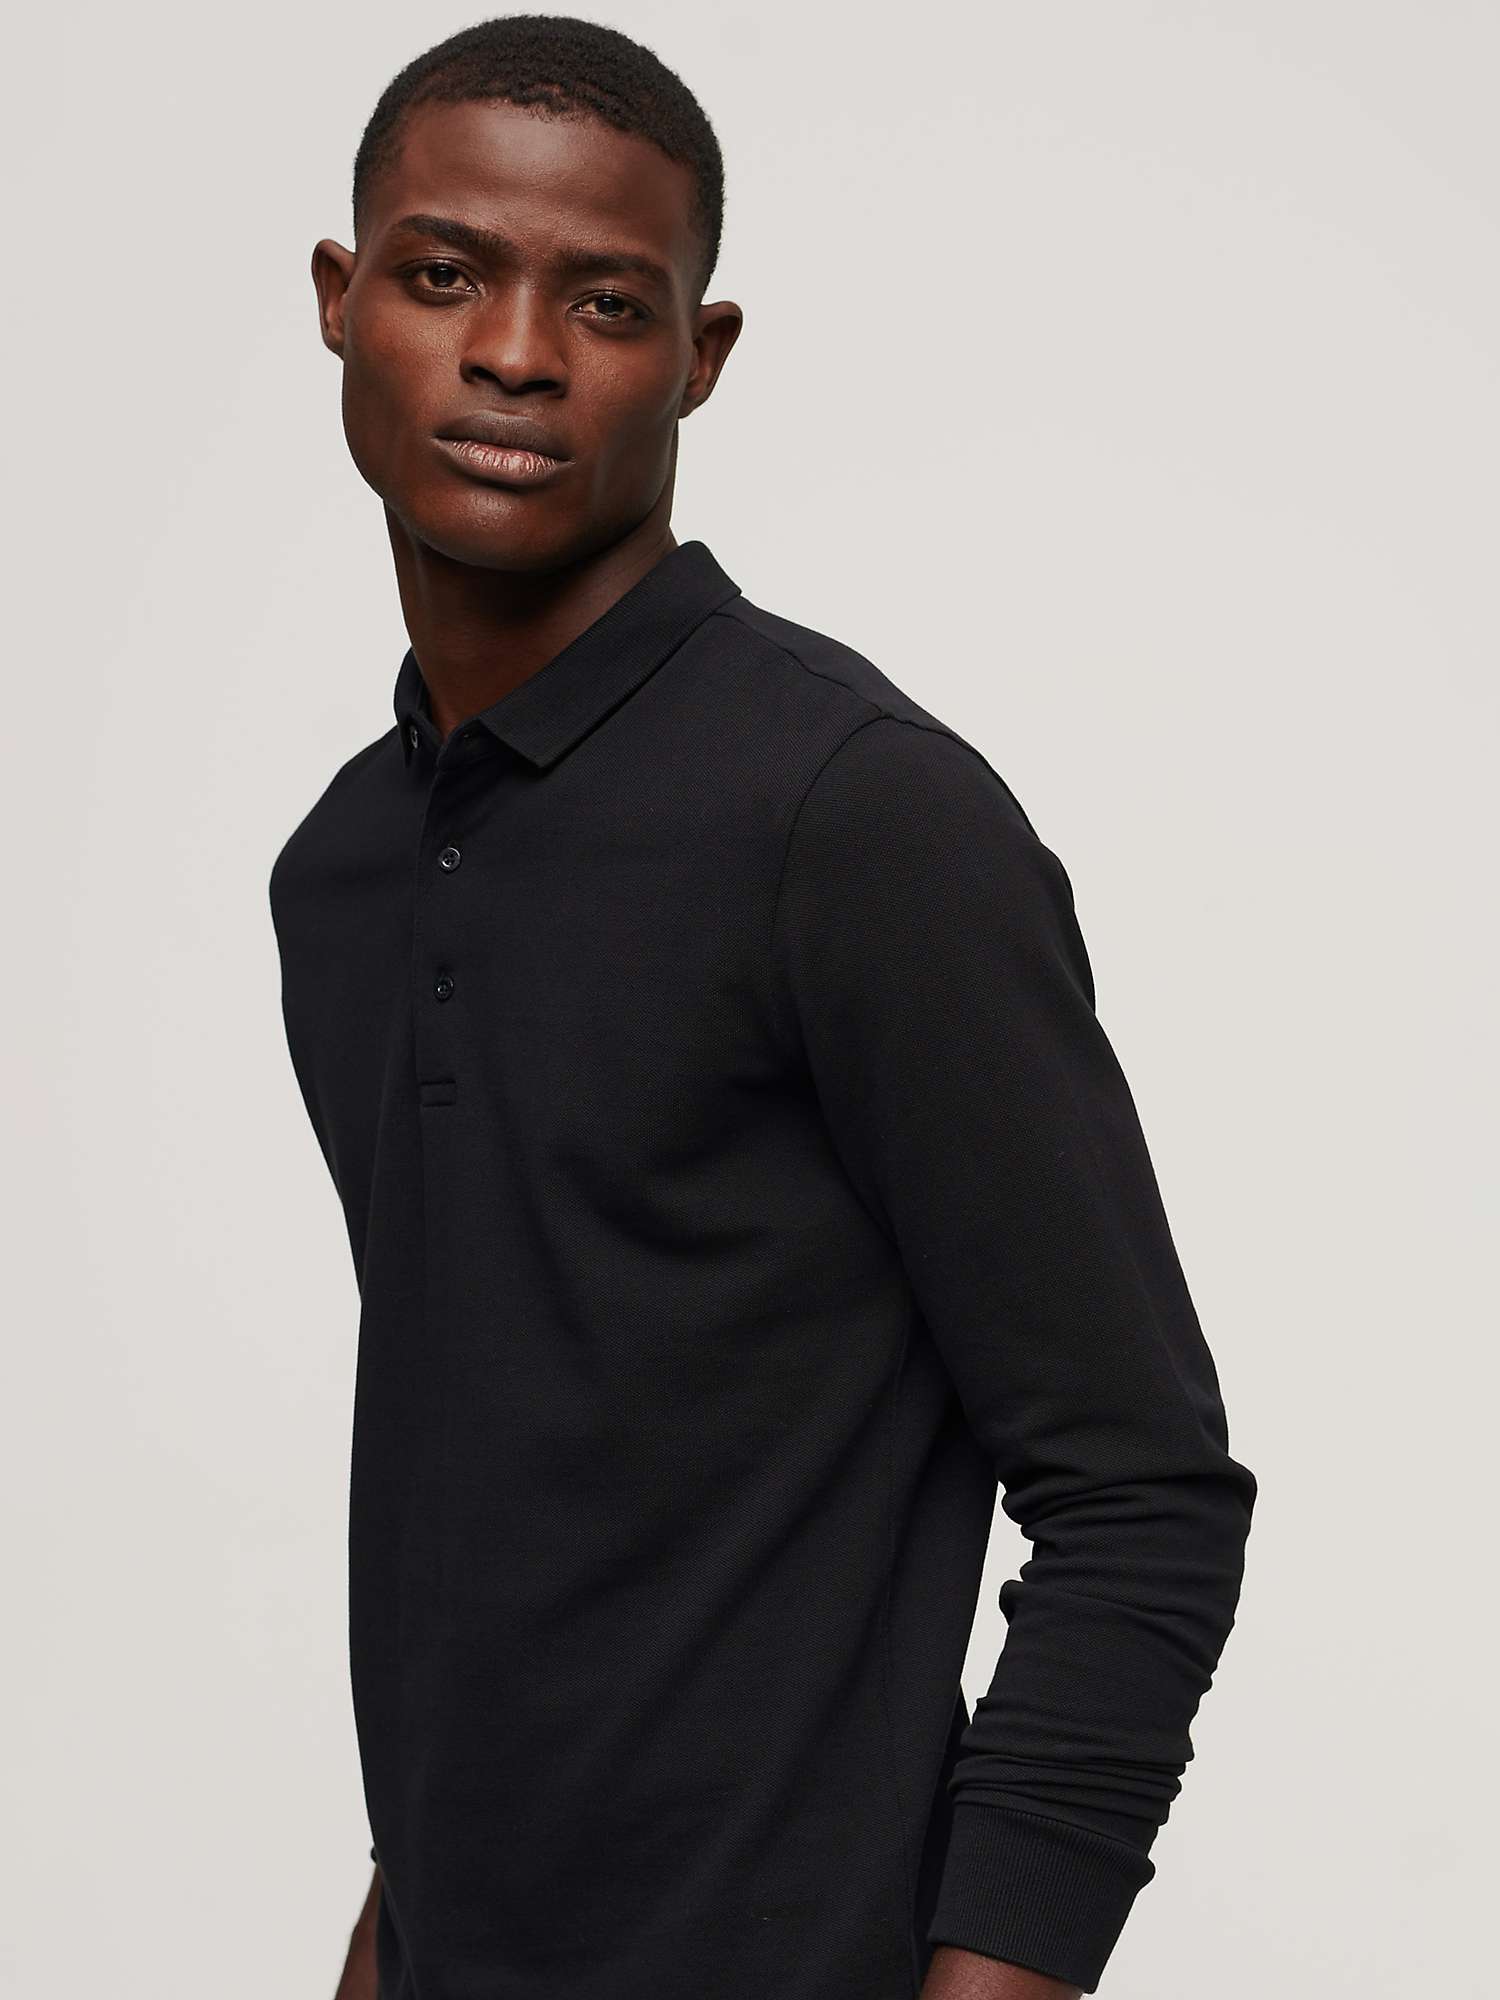 Buy Superdry Long Sleeve Cotton Pique Polo Shirt Online at johnlewis.com